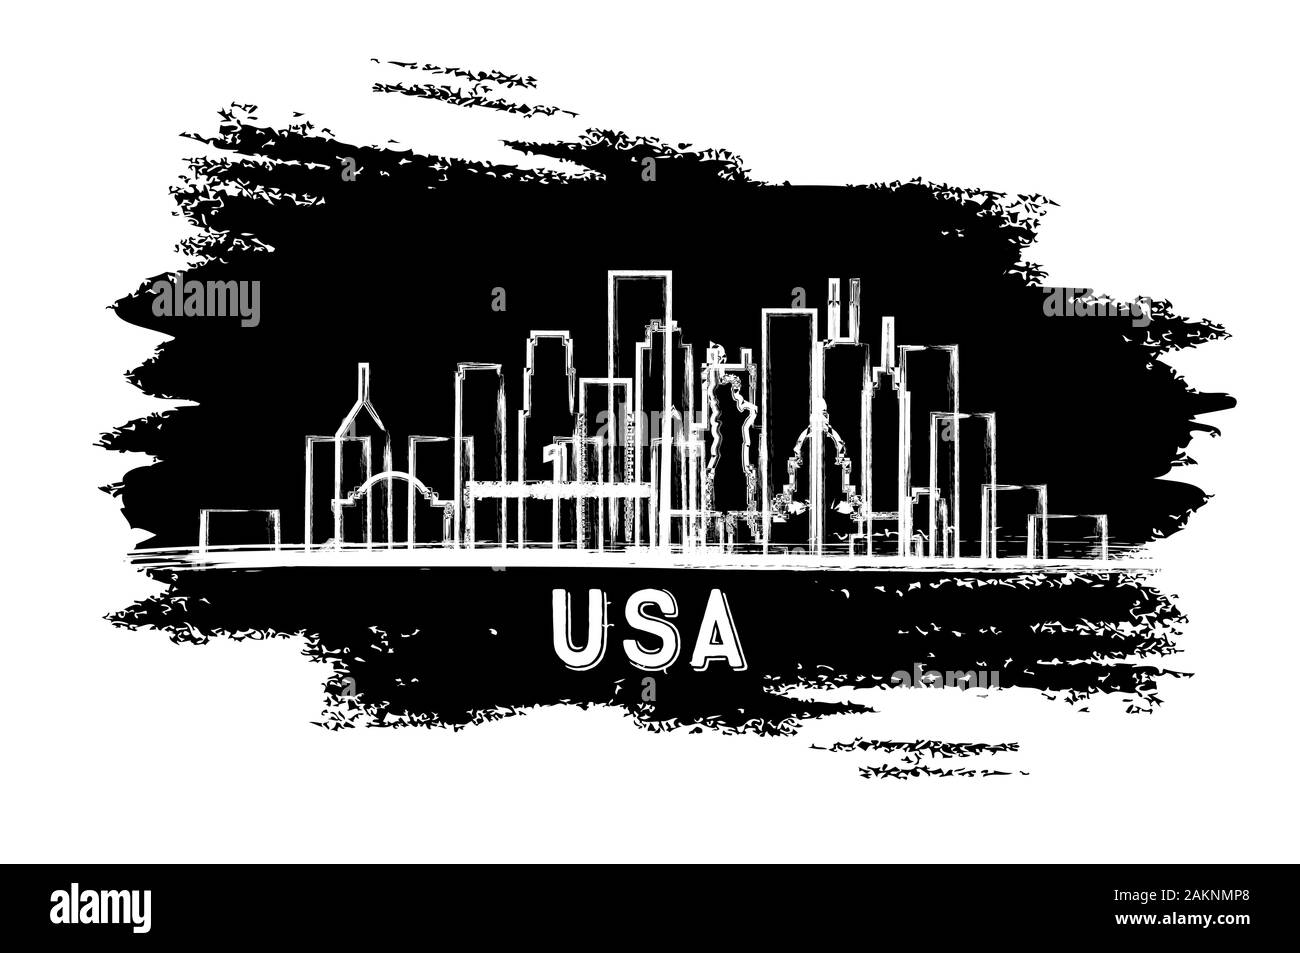 USA City Skyline Silhouette. Hand Drawn Sketch. Vector Illustration. Business Travel and Tourism Concept with Historic Architecture. USA Cityscape. Stock Vector